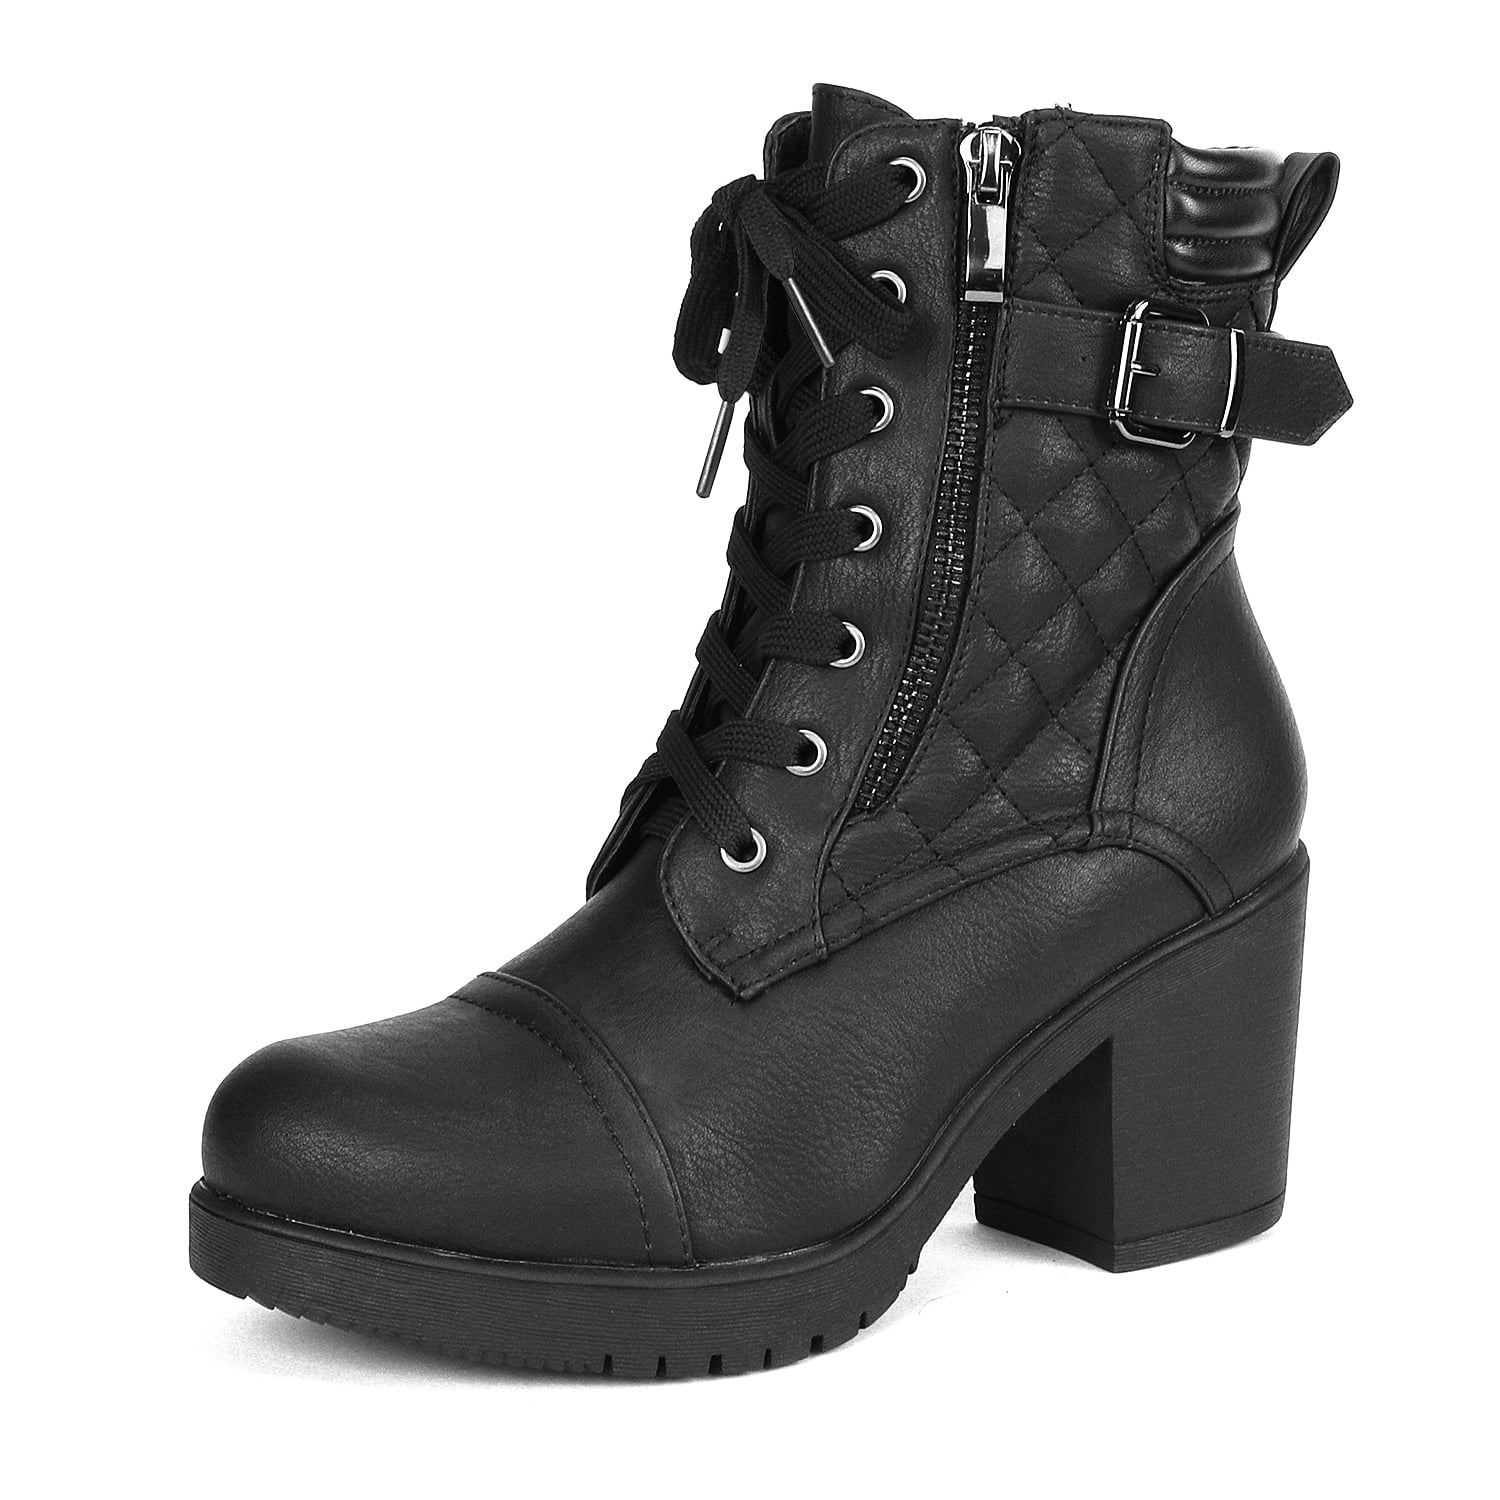 DREAM PAIRS Womens High Heel Ankle Boots 